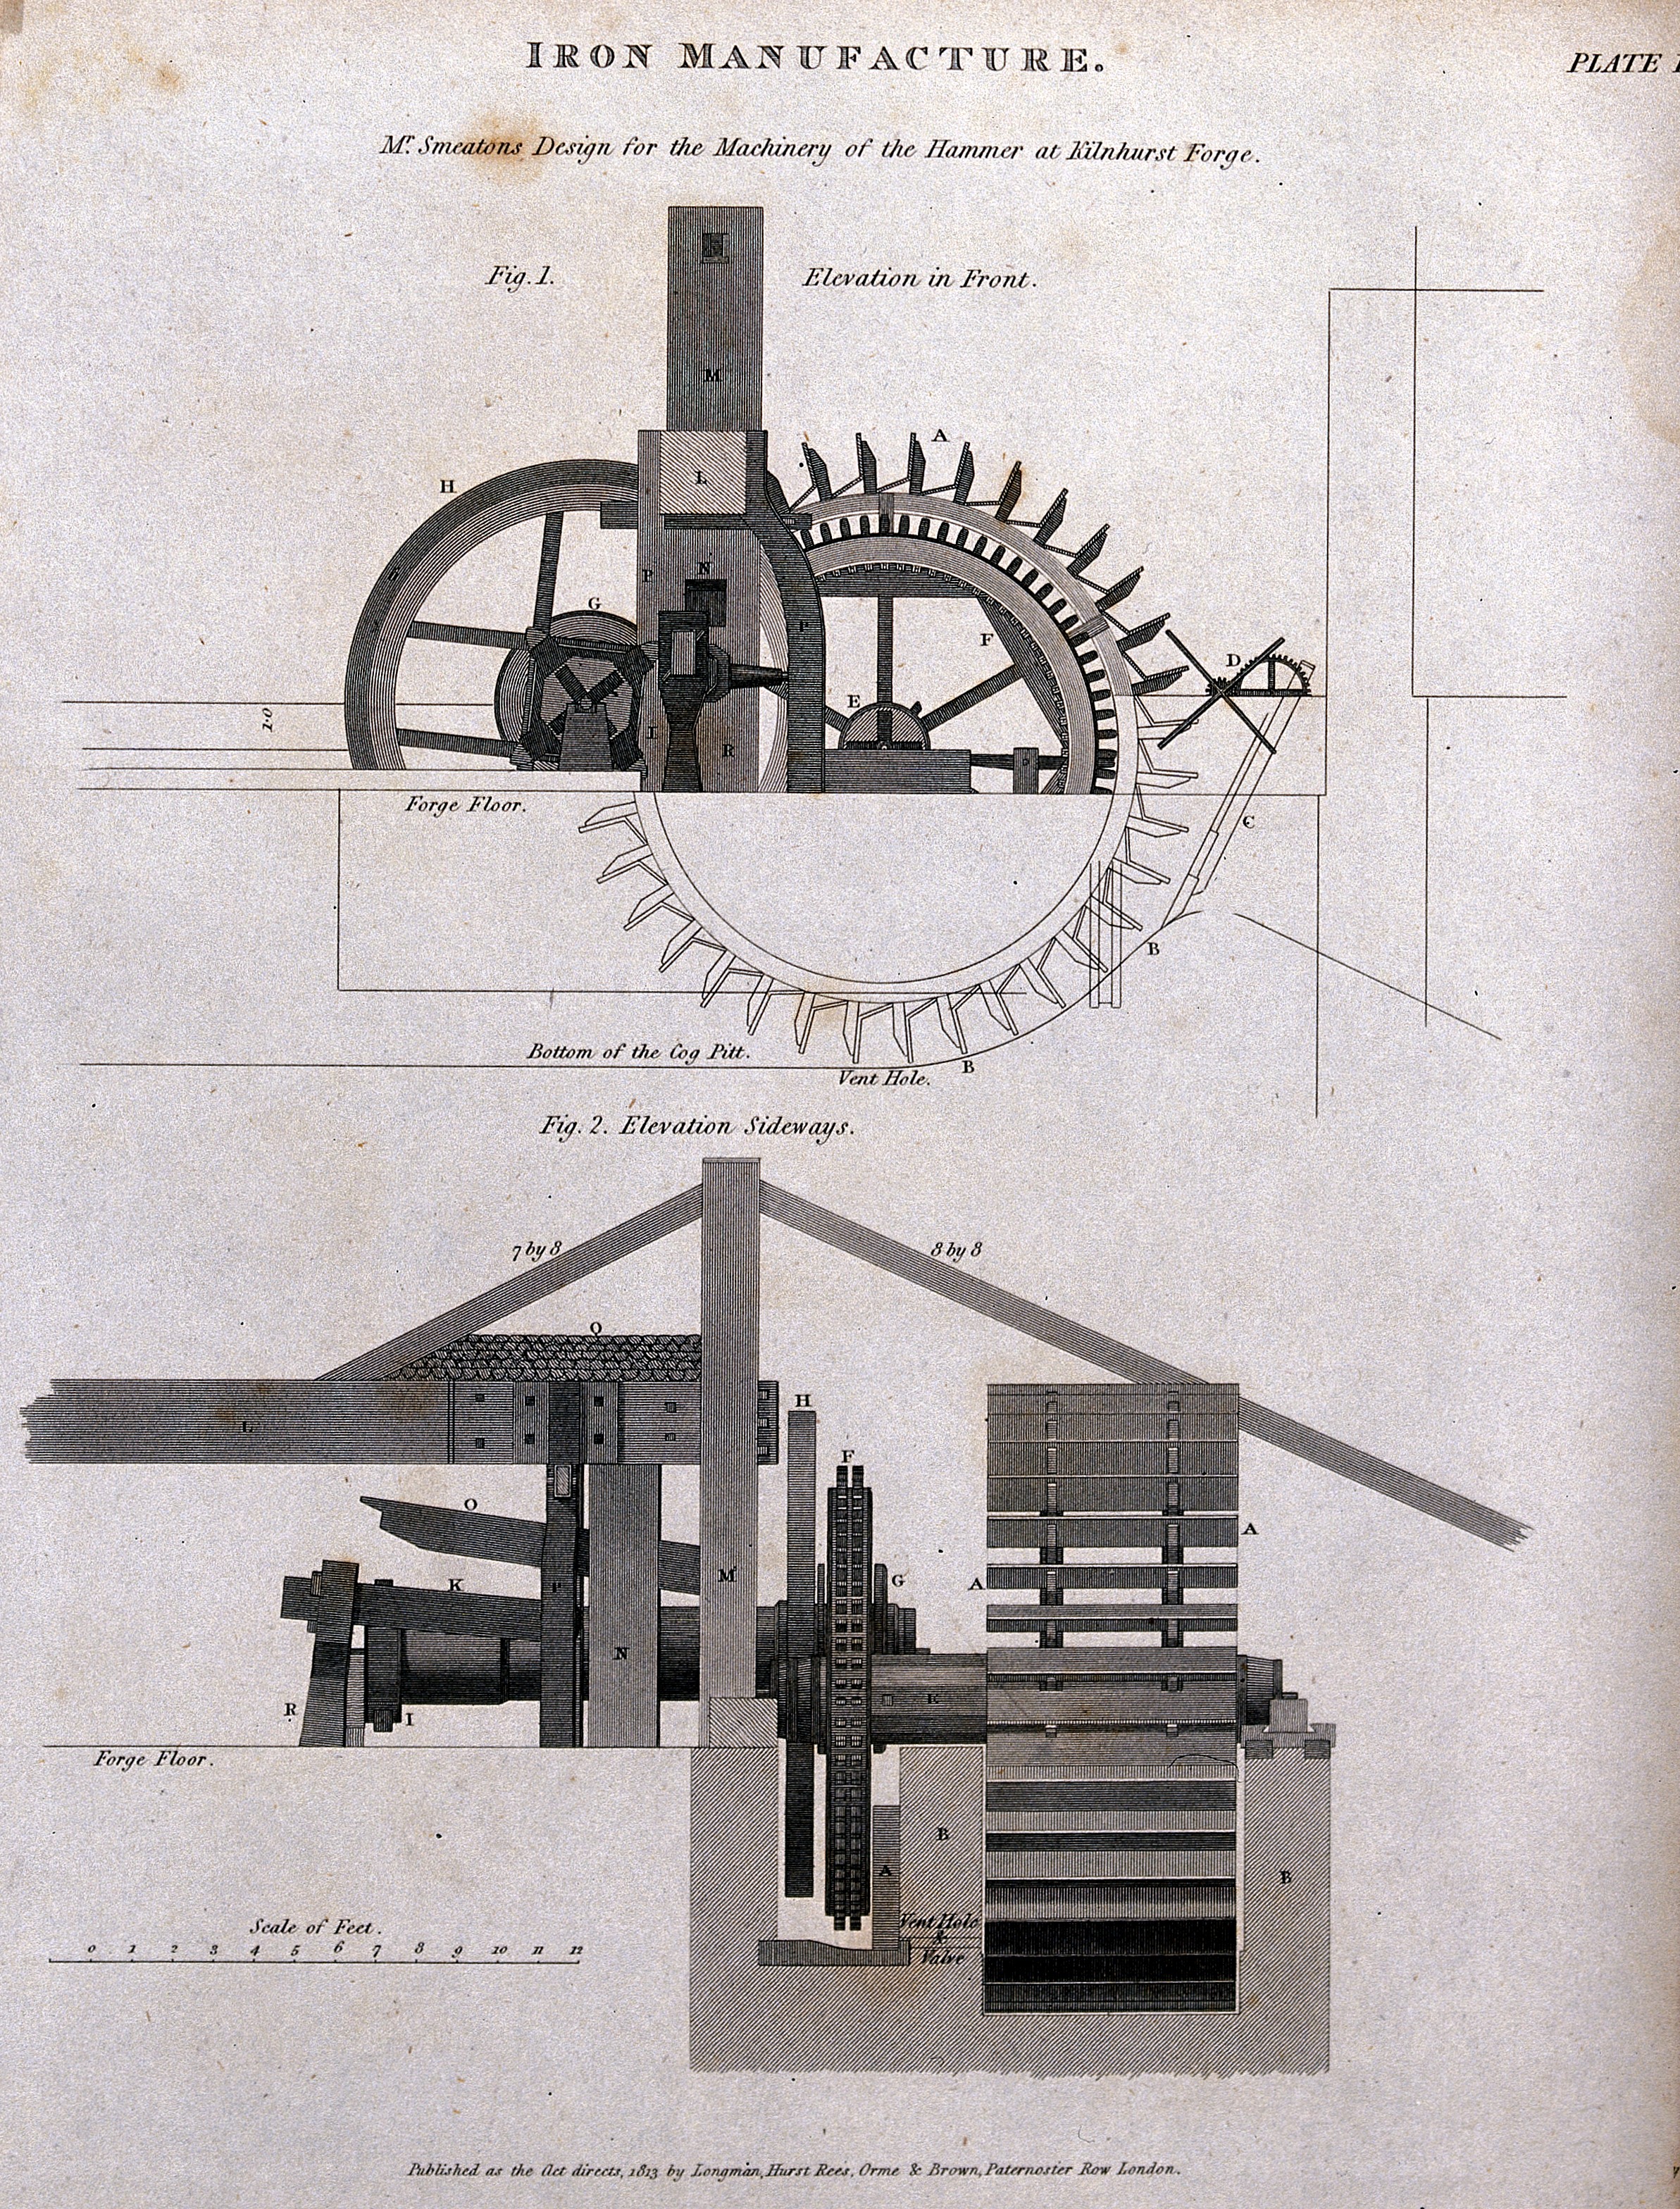 Engineering; cross-sections of the hammer designed by John S Wellcome V0023560